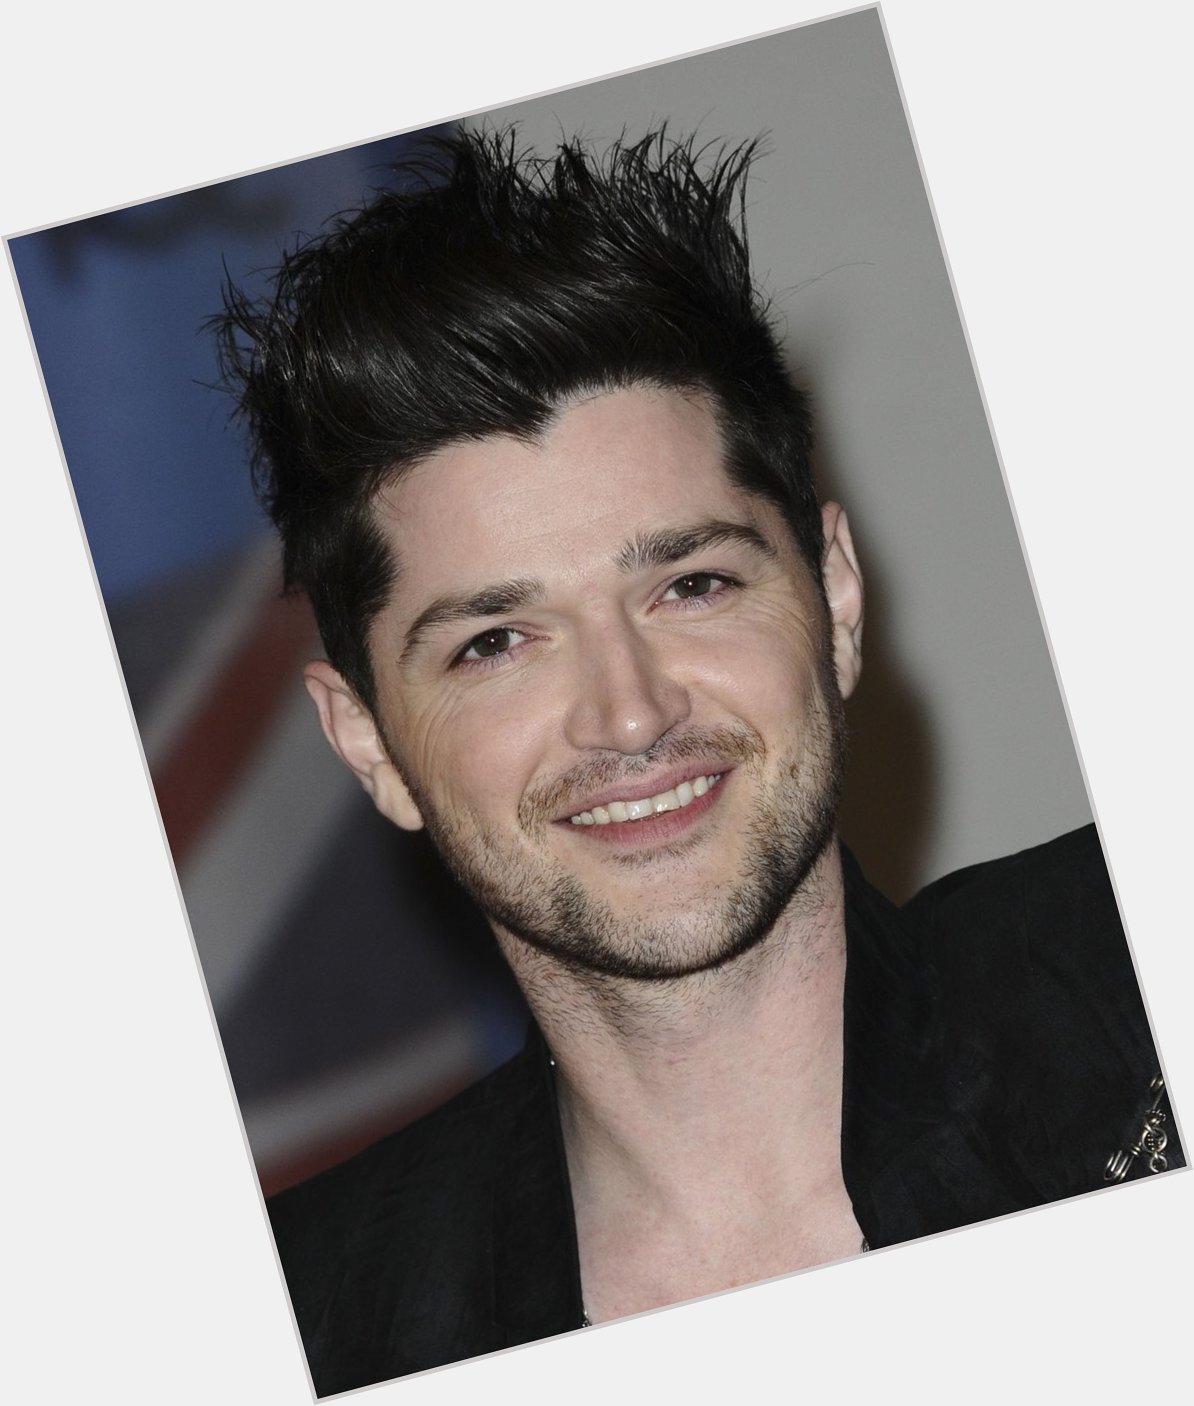 Happy 40th Birthday to Danny O\ Donoghue, the lead vocalist of \The Script\.
Live long legend!  